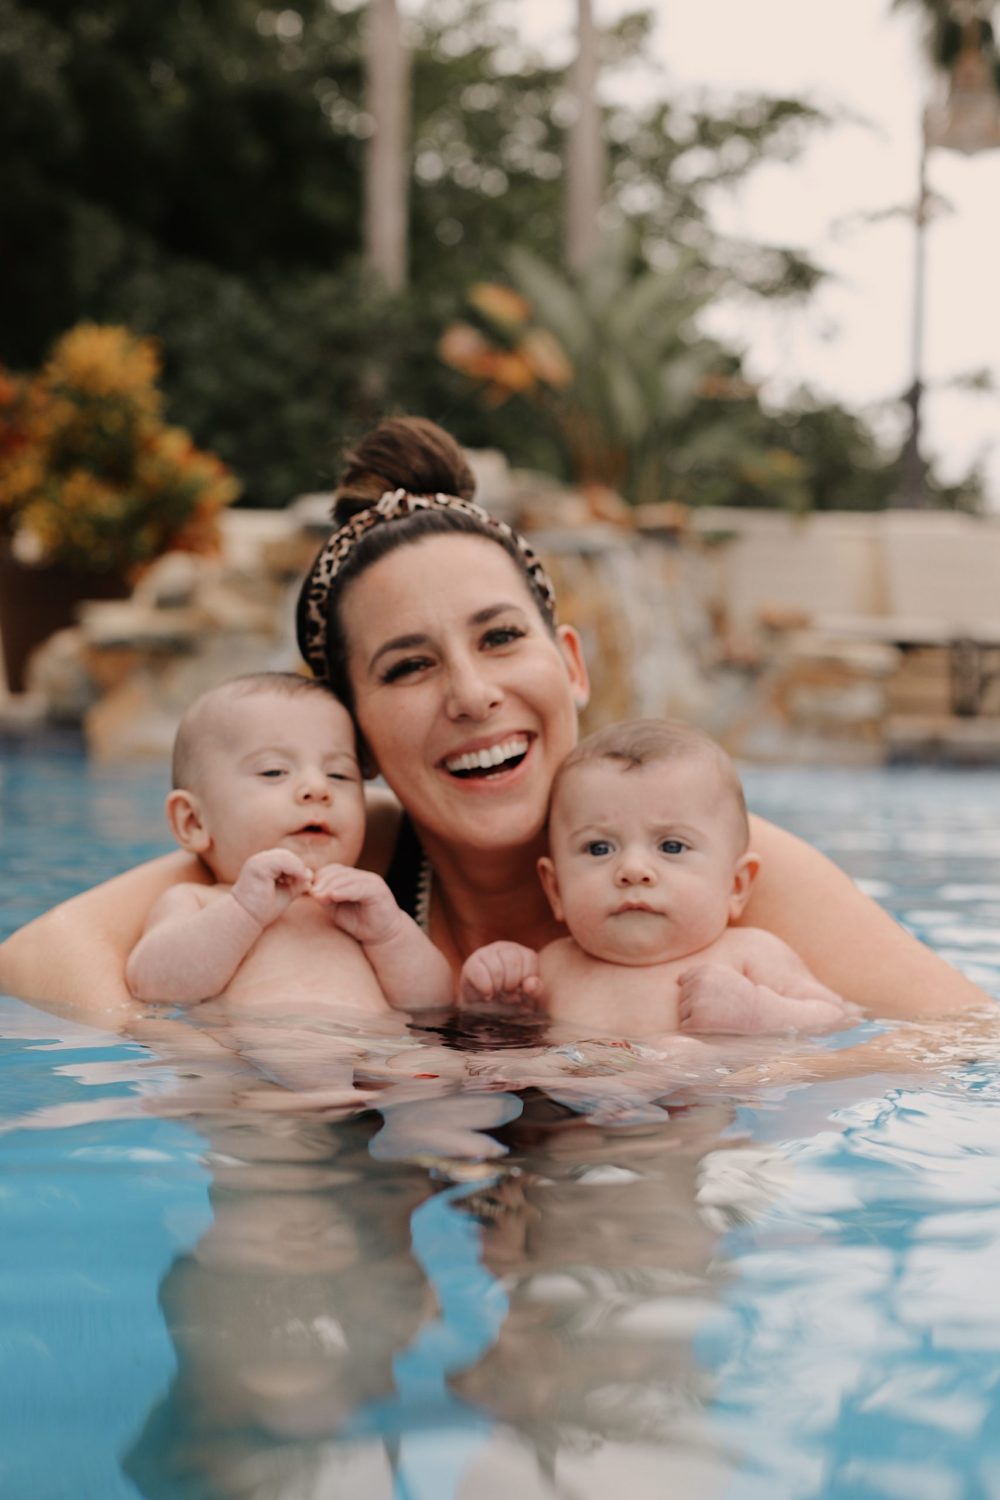 Salt water pool conversion guide featured by top Florida home blog, Fresh Mommy Blog | Mom holding twin babies in the pool. Spectacular Things to Do in Naples This Weekend | Hayward Aqua Rite Salt Chlorine Generator by popular Florida lifestyle blog, Fresh Mommy Blog: image of a mom holding her two twin babies in their swimming pool. 